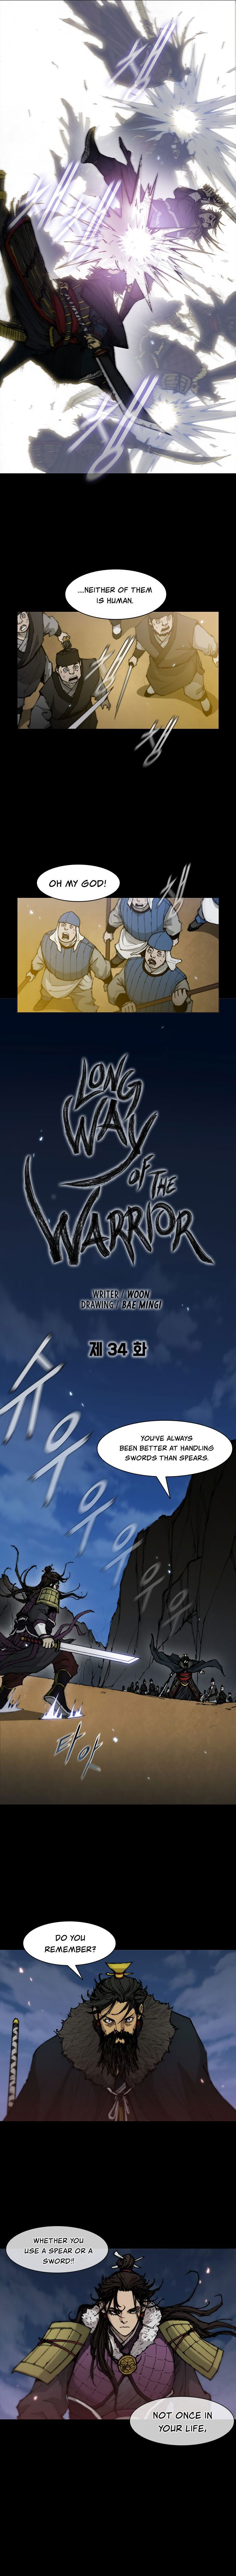 The Long Way of the Warrior Chapter 34 page 5